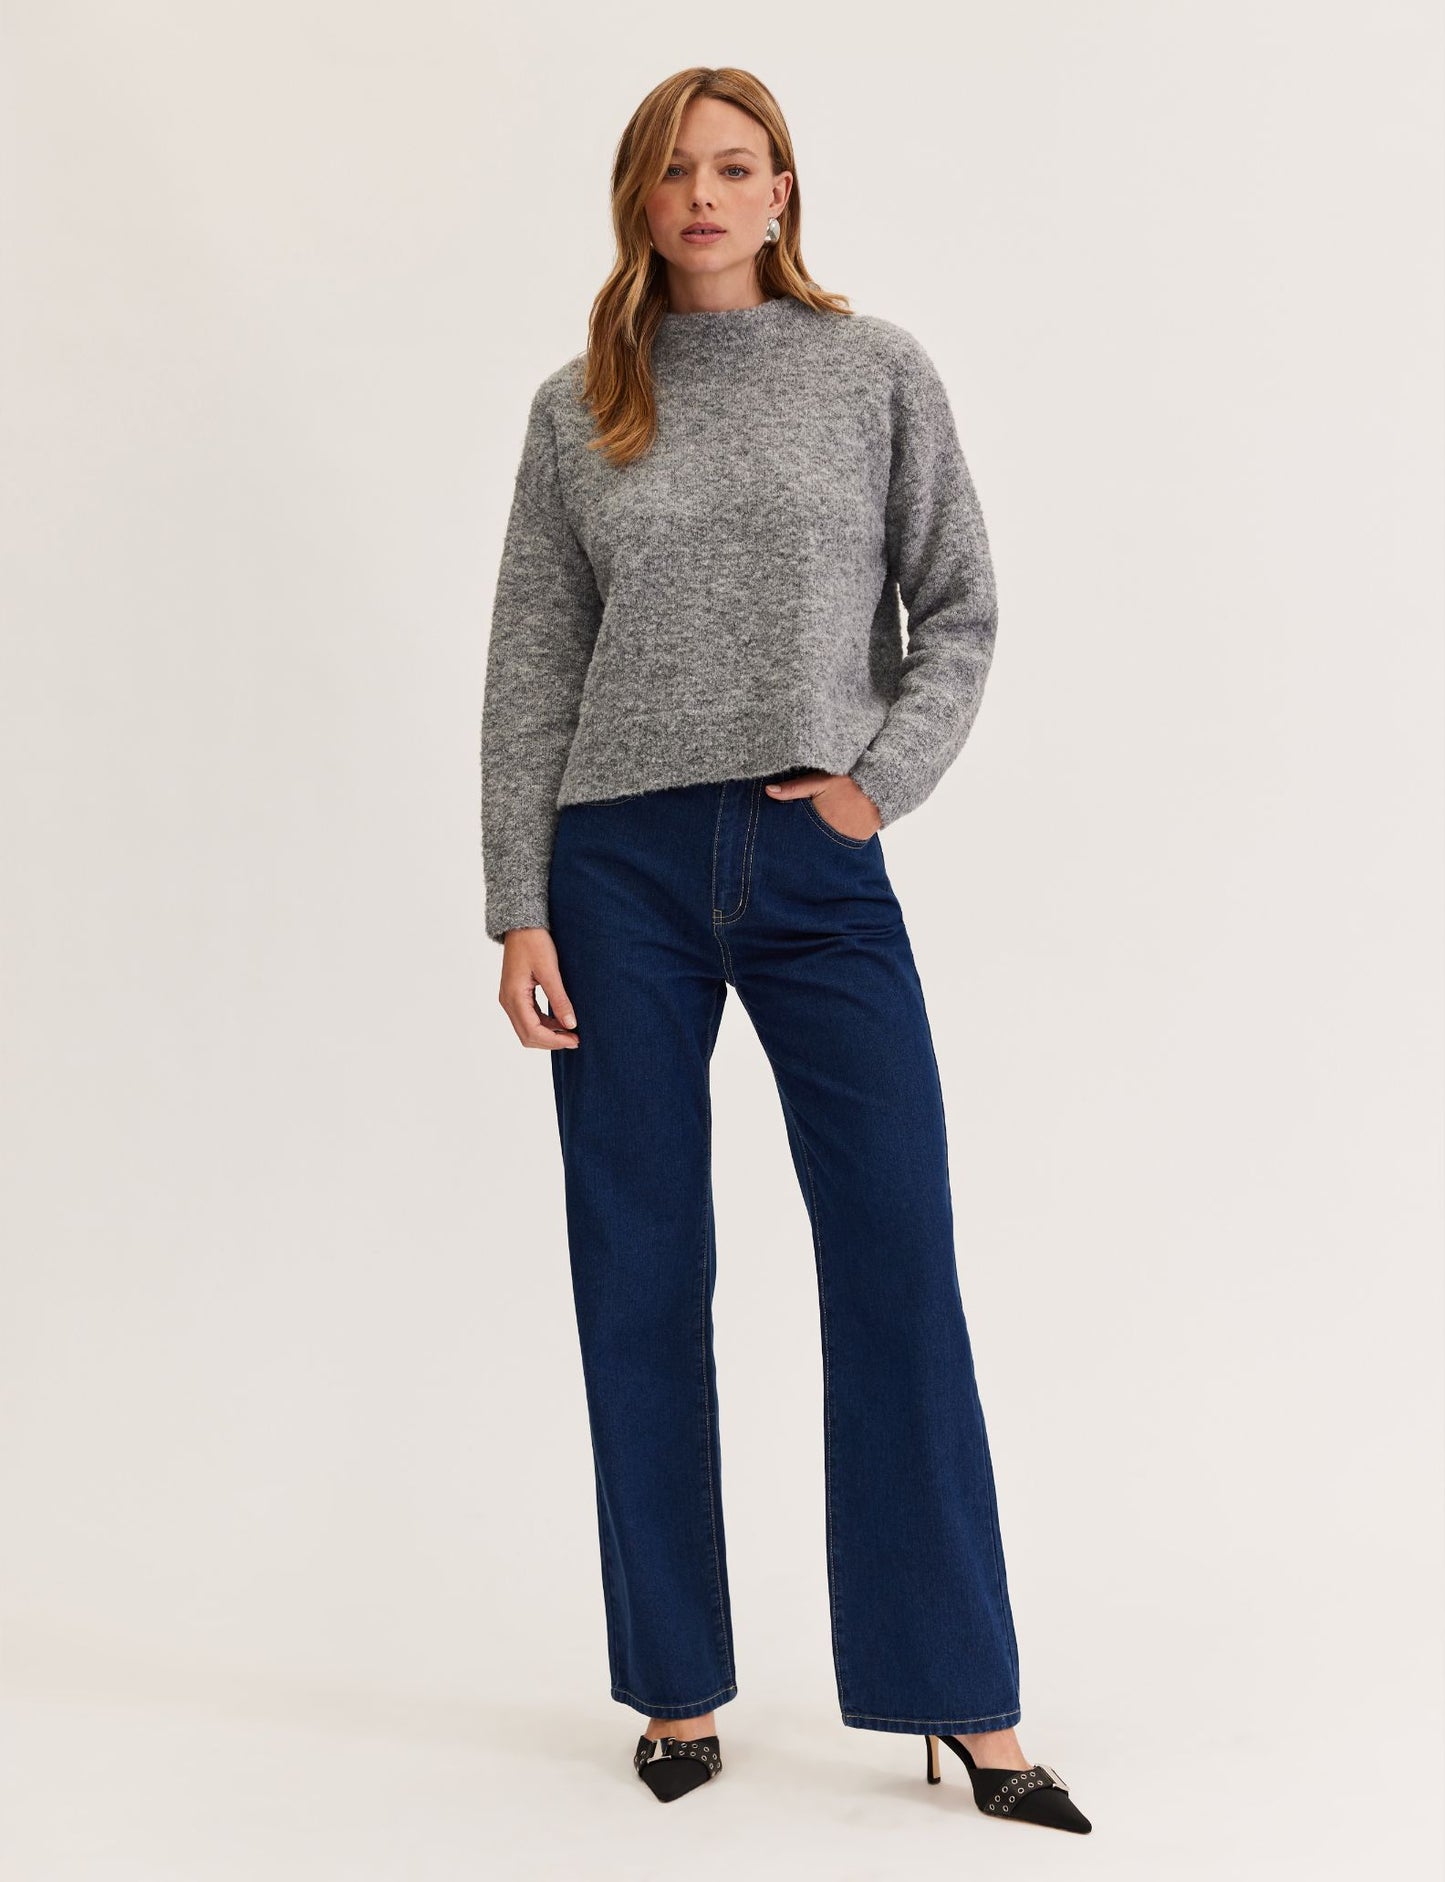 Staple the Label Anderson Boucle Jumper in Grey-Marle